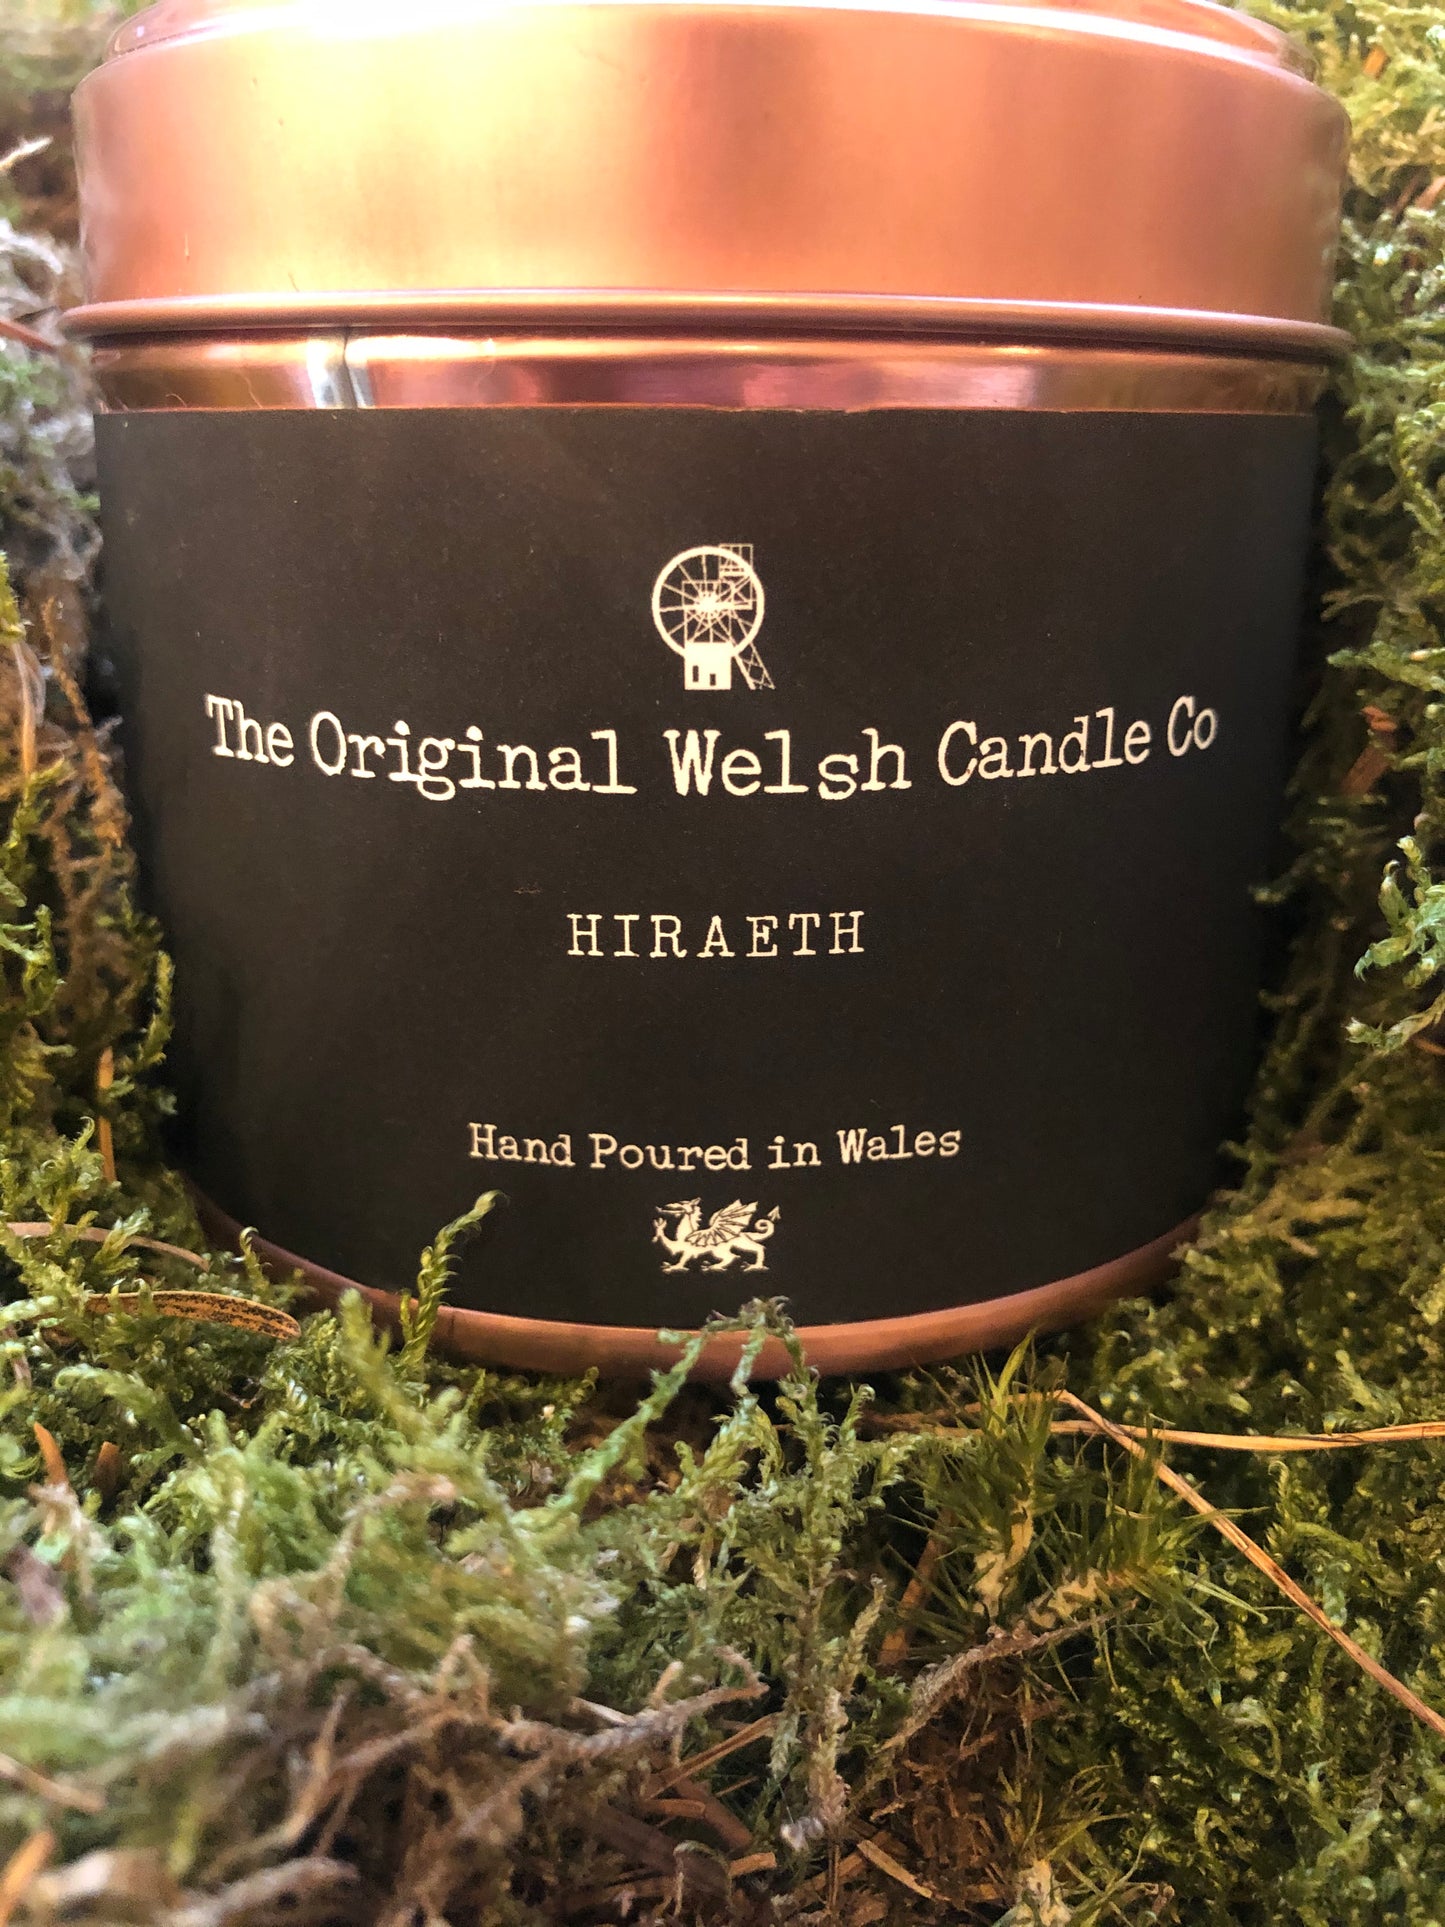 Hiraeth copper tin candle scented with Cedarwood and Patchouli